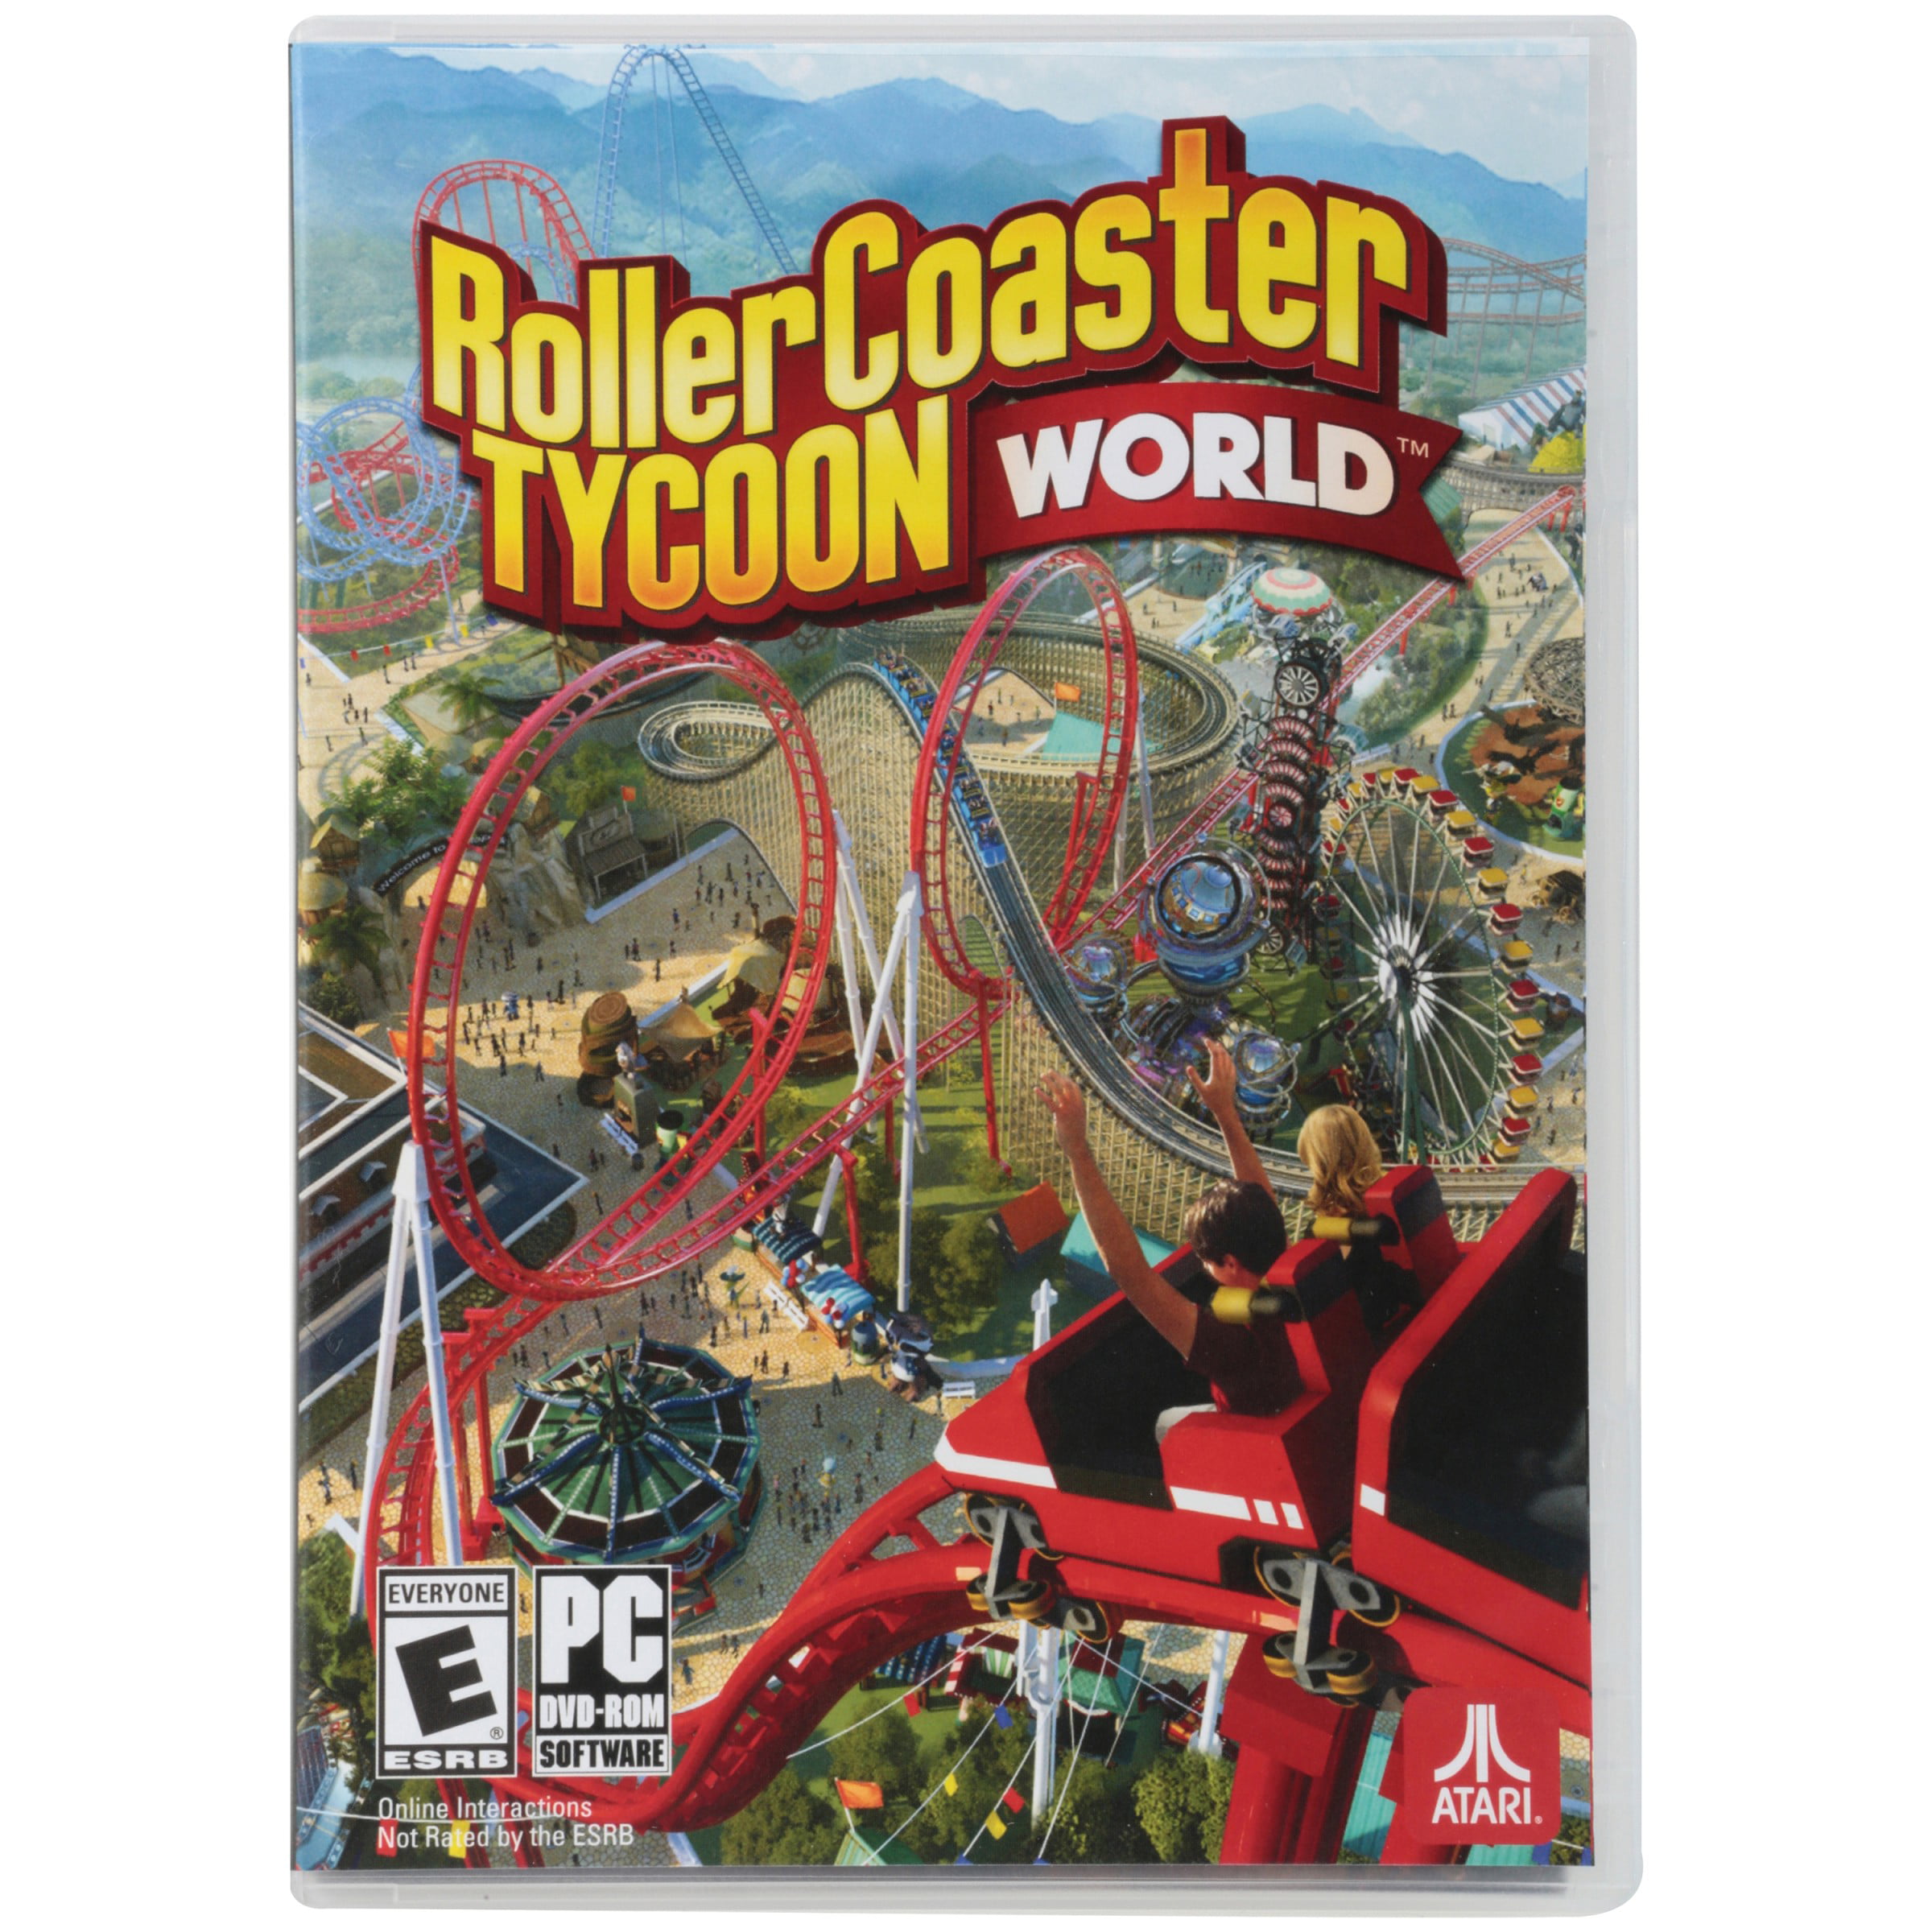 Atari has Officially Announced 'RollerCoaster Tycoon Adventures Deluxe' -  mxdwn Games